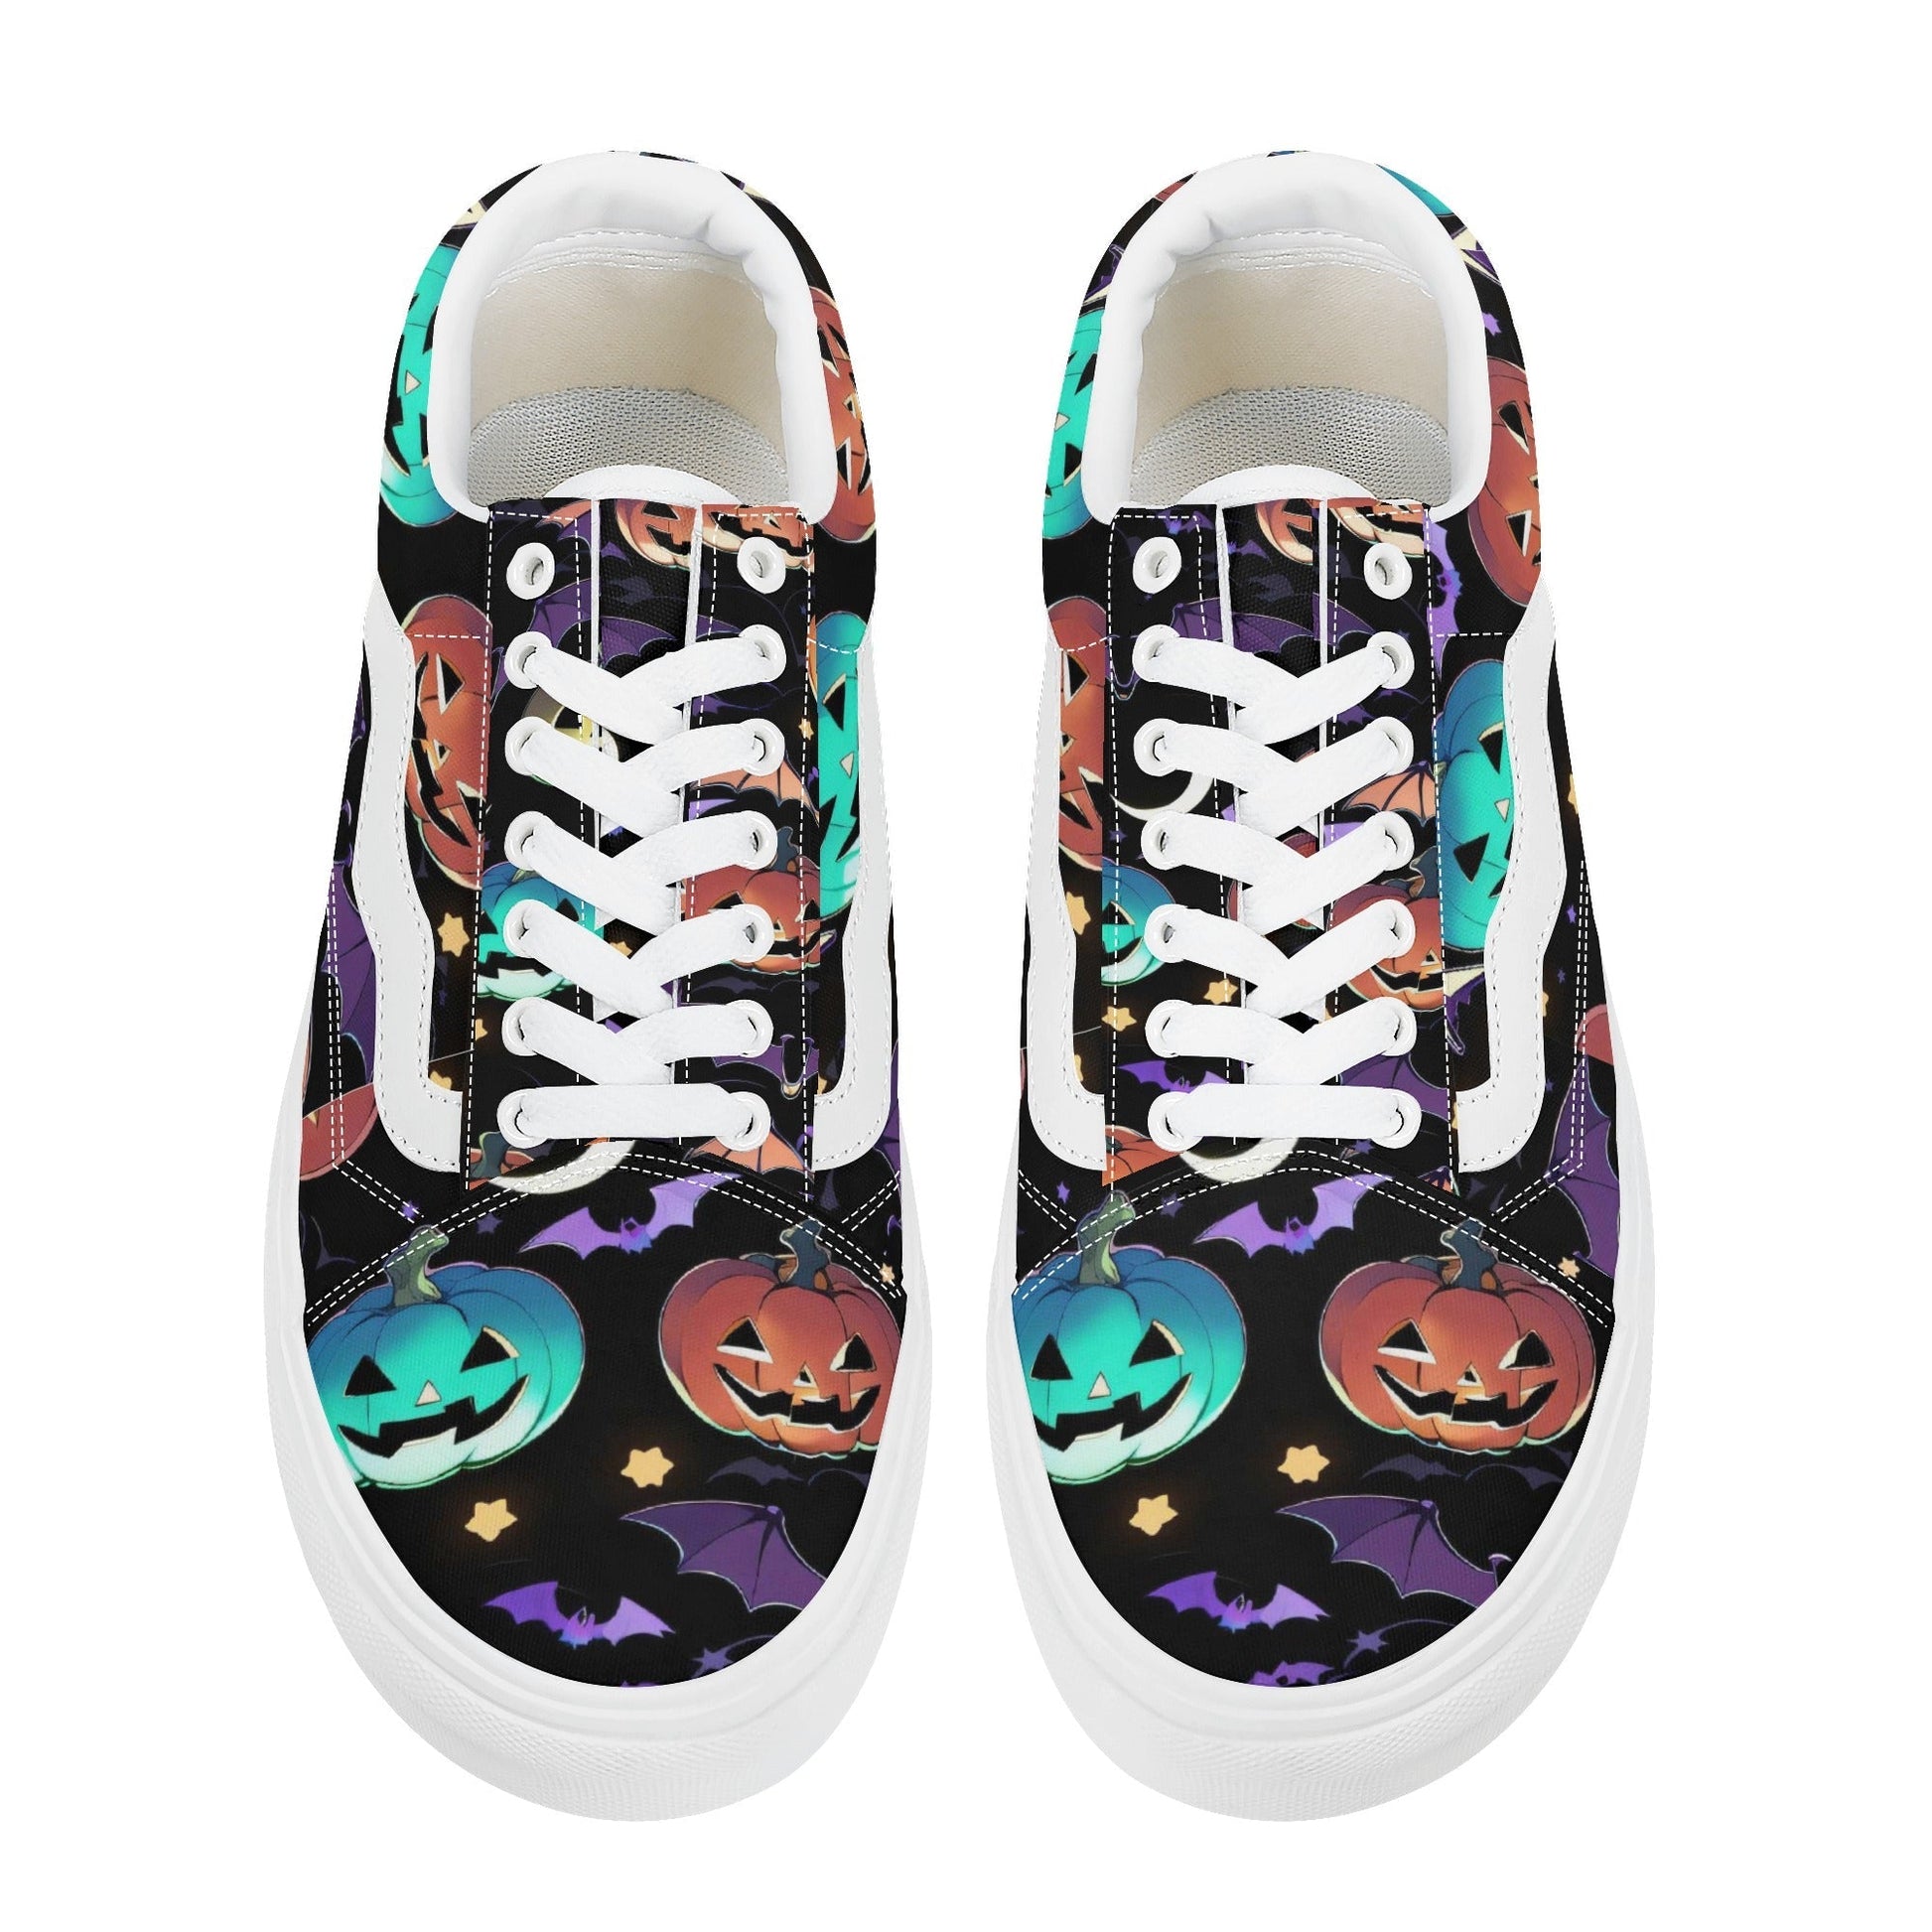 Stand out  with the  Nugieween Mens Low Top Sneakers  available at Hey Nugget. Grab yours today!